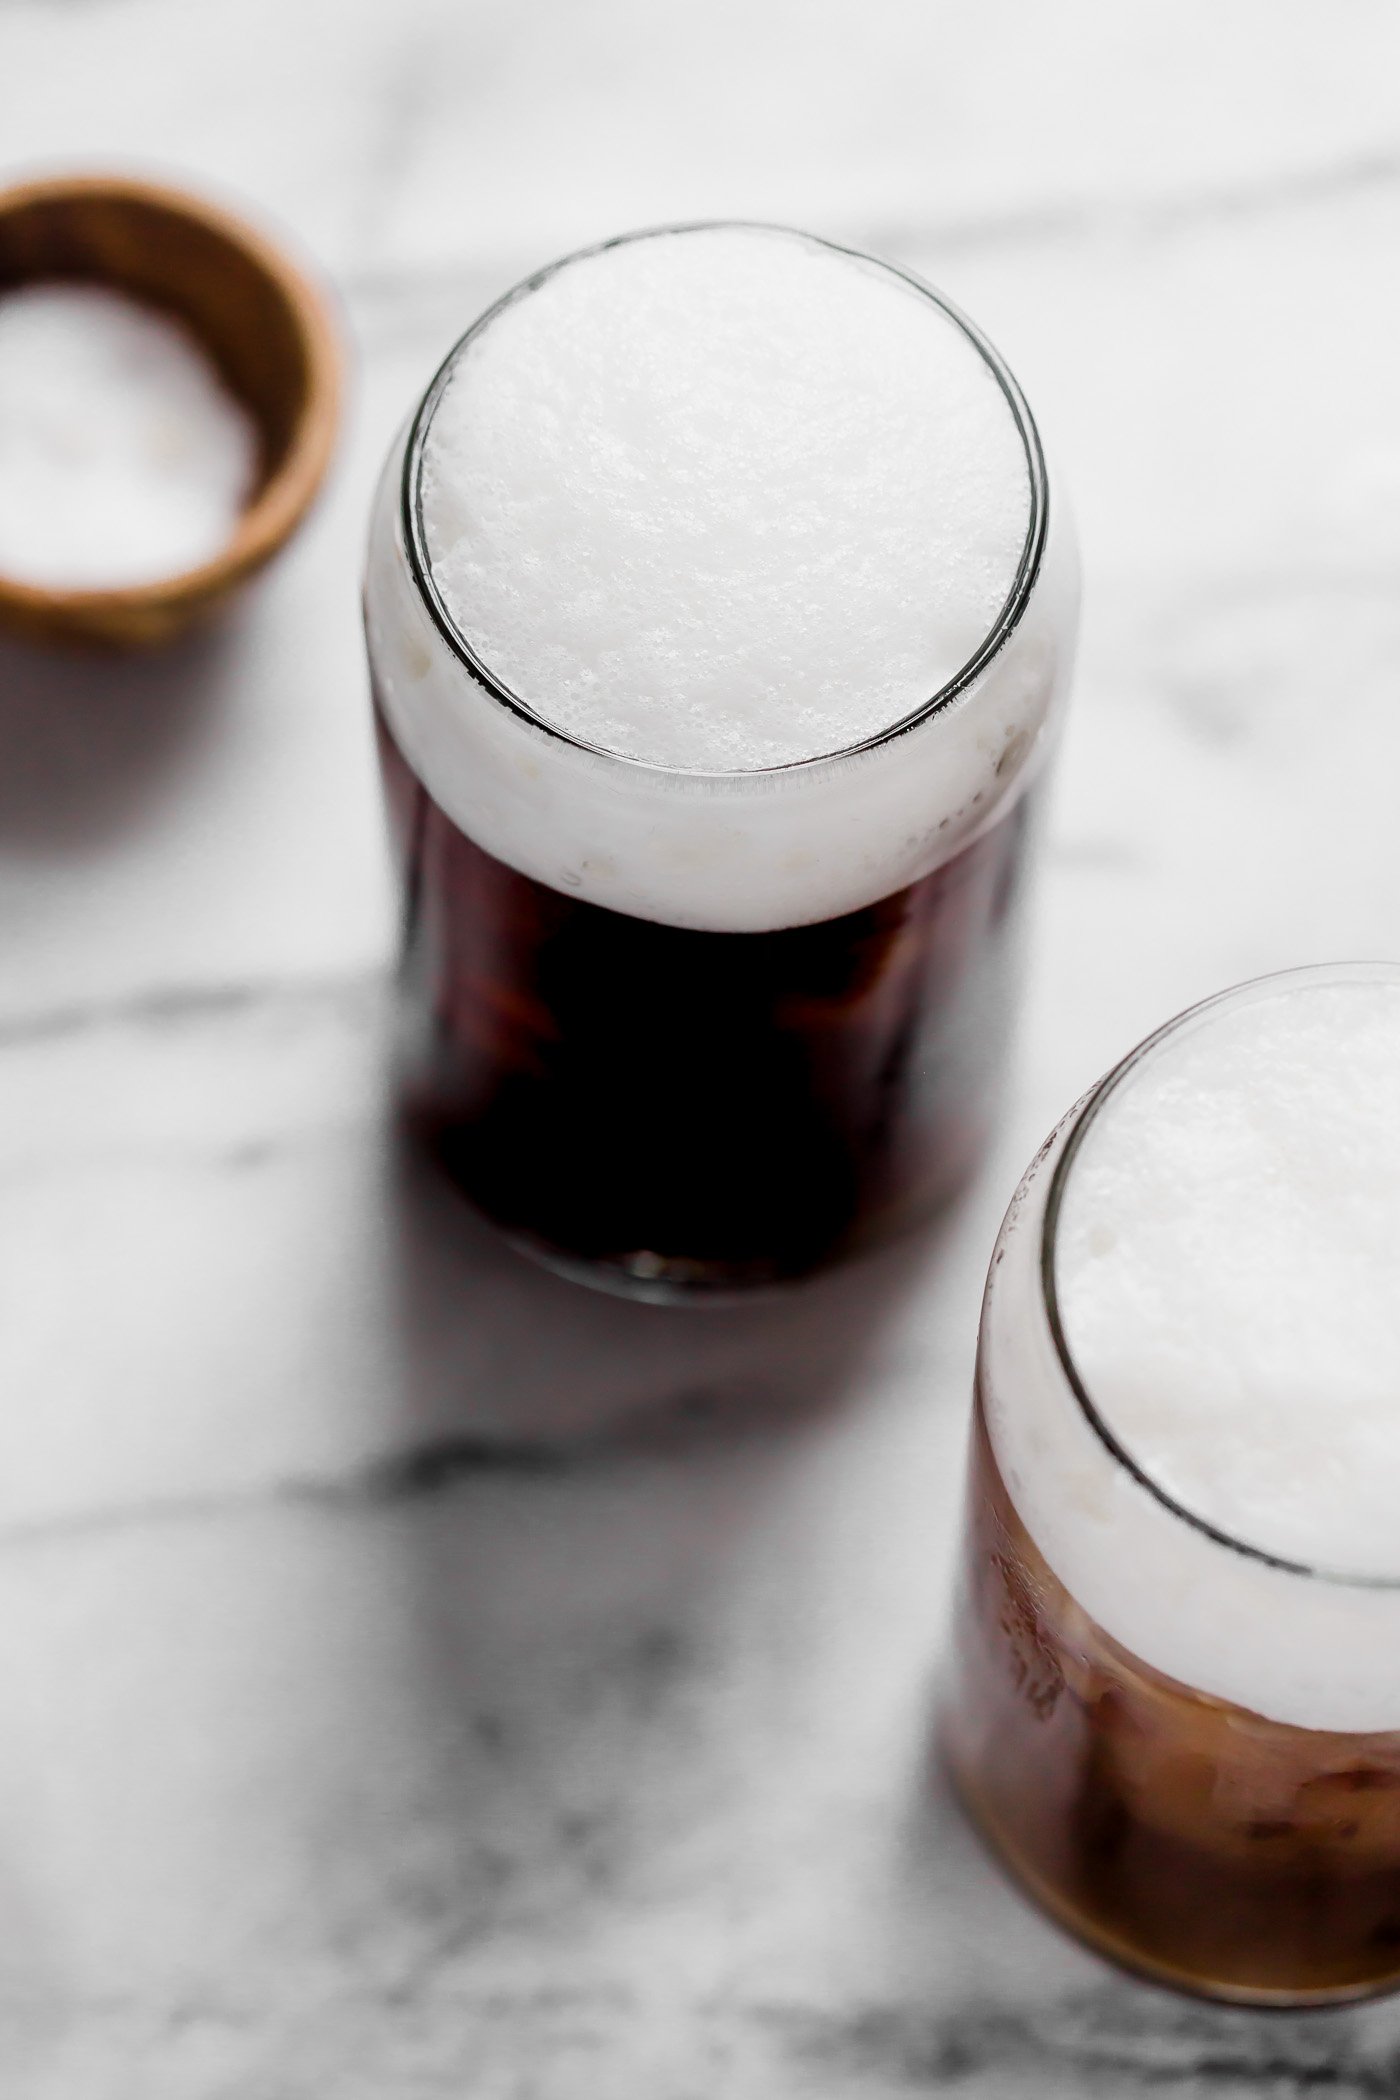 an easy & natural recipe for homemade starbucks salted cream cold foam cold brew with only 4-ingredients! cold brew coffee, lightly sweetened with maple syrup, topped with a creamy salty-sweet cold foam, this salted cream cold foam cold brew coffee is the perfect salty-sweet coffee drink! #playswellwithbutter #saltedcreamcoldfoamcoldbrewcoffee #coldbrew #coldbrewcoffeerecipe #icedcoffee #easycoffeerecipe #starbucksdrinks #starbucksrecipe